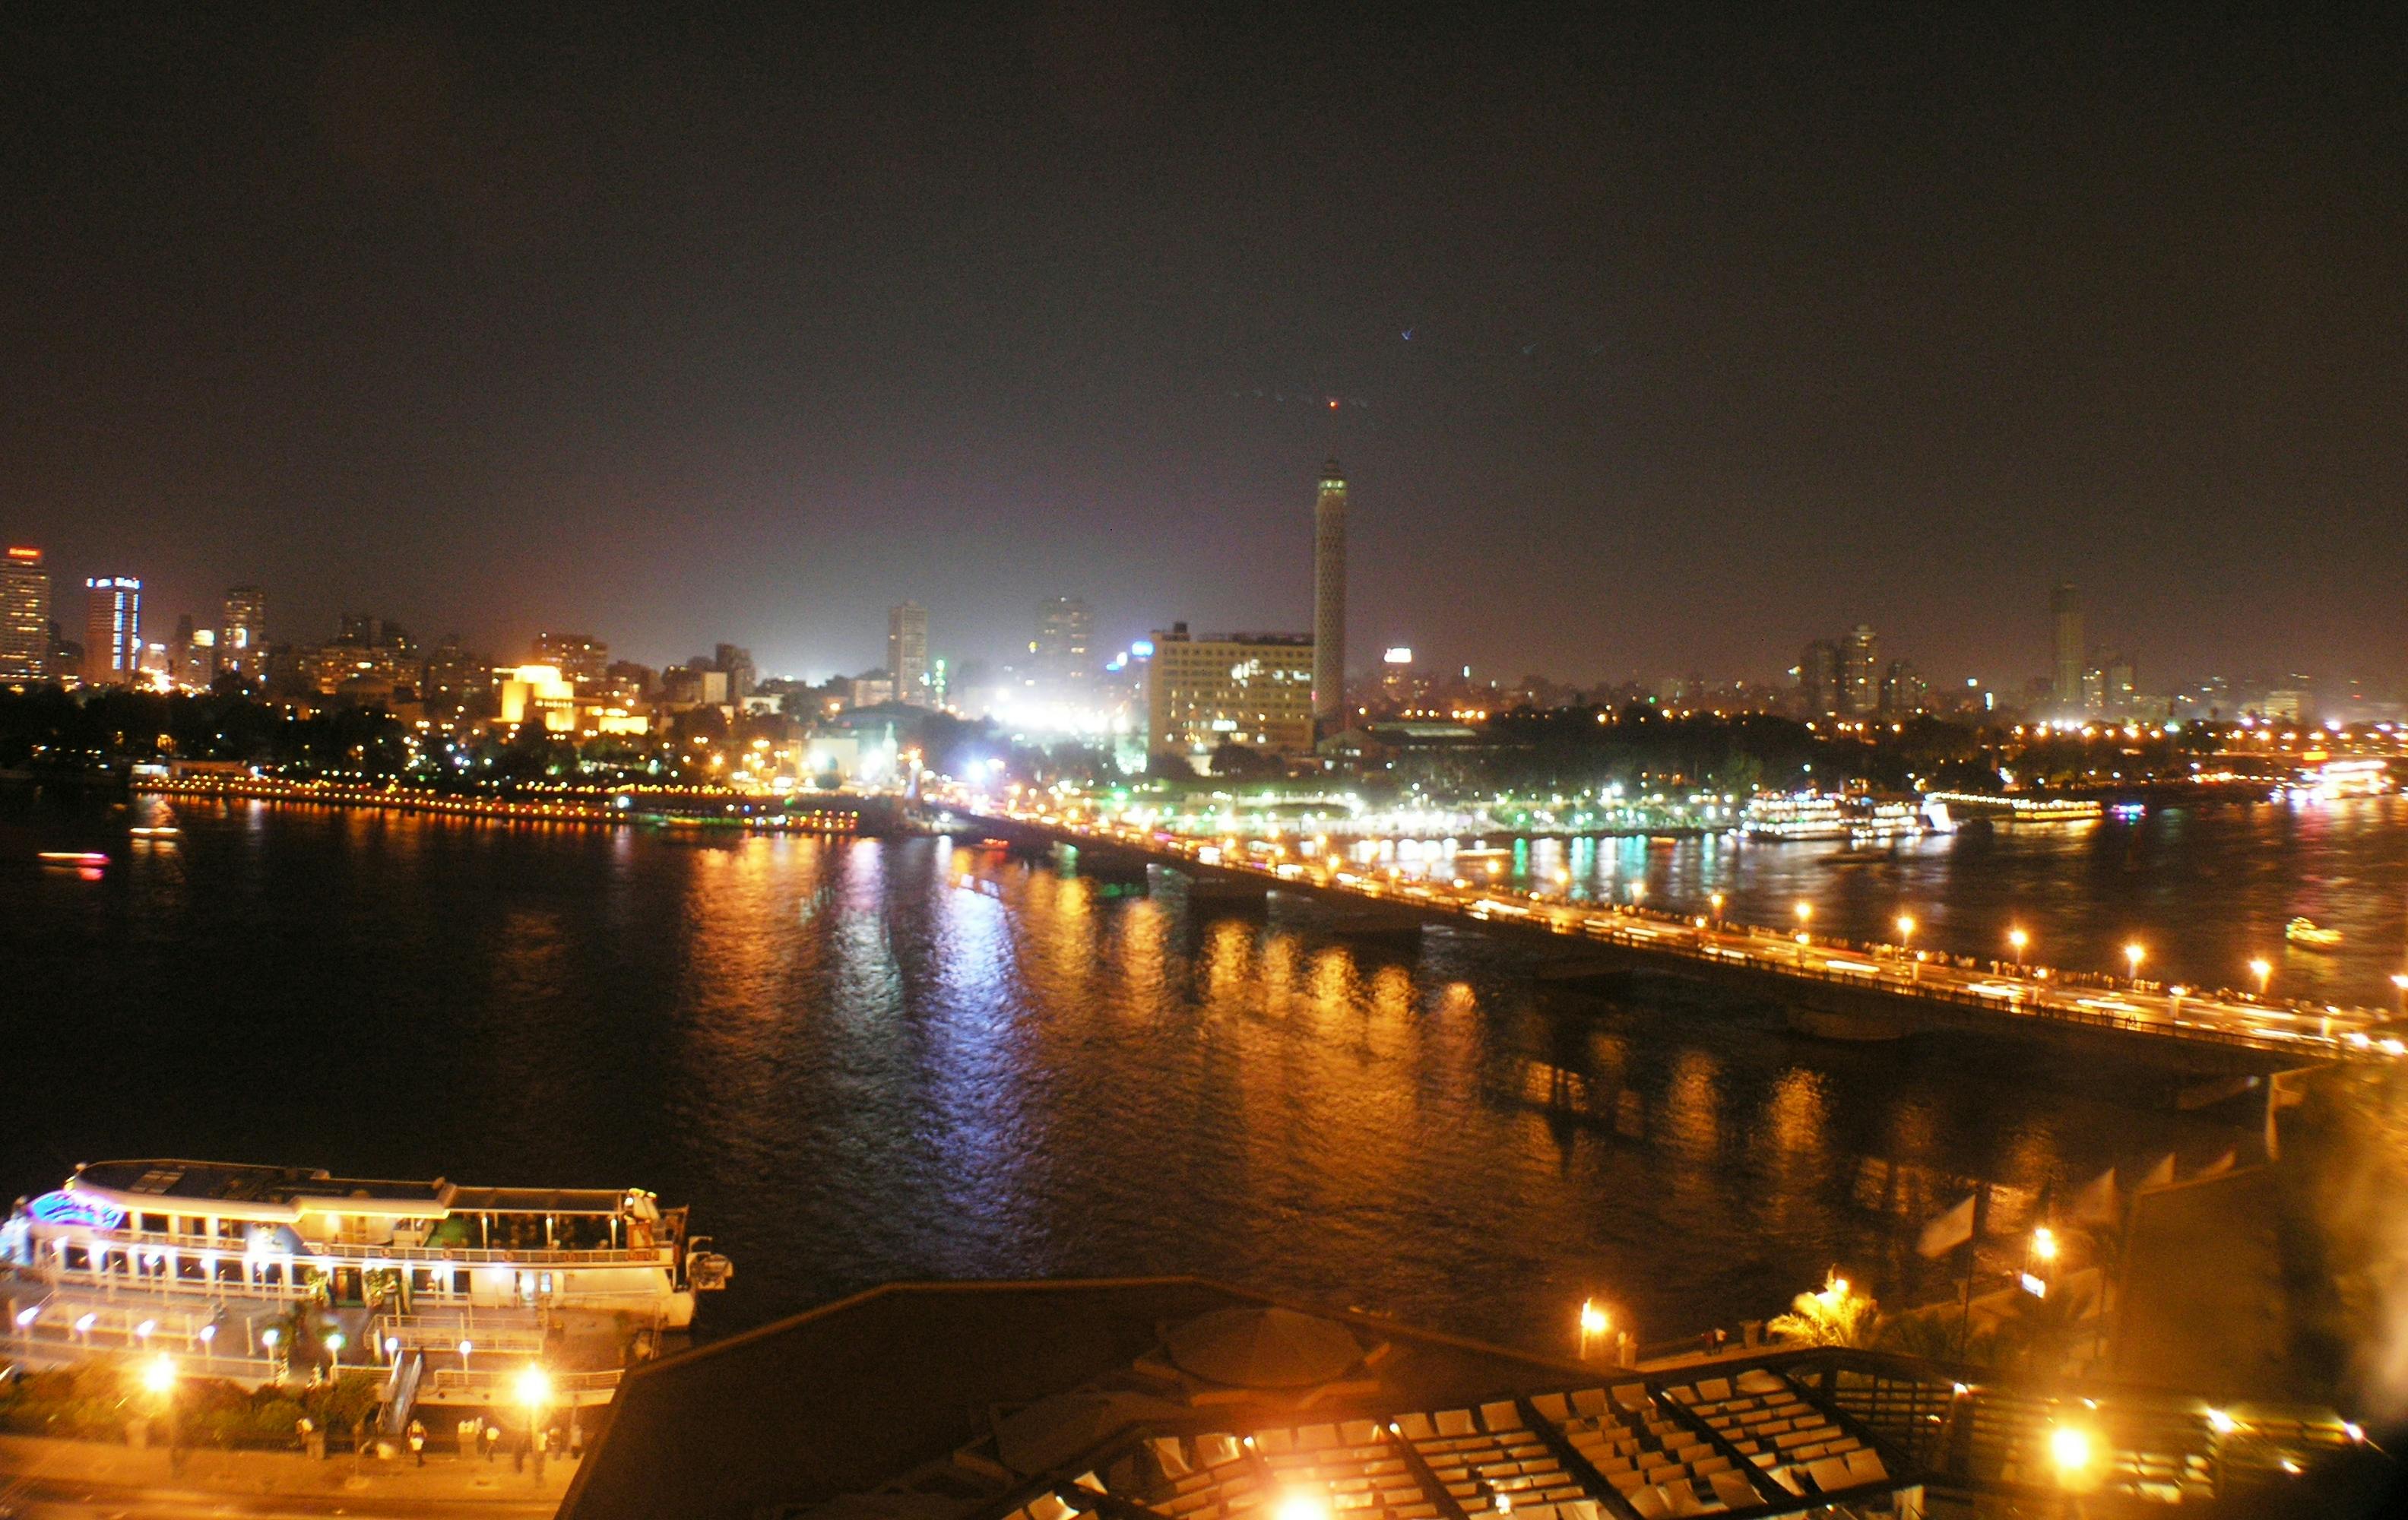 Nile River dinner cruise in Cairo